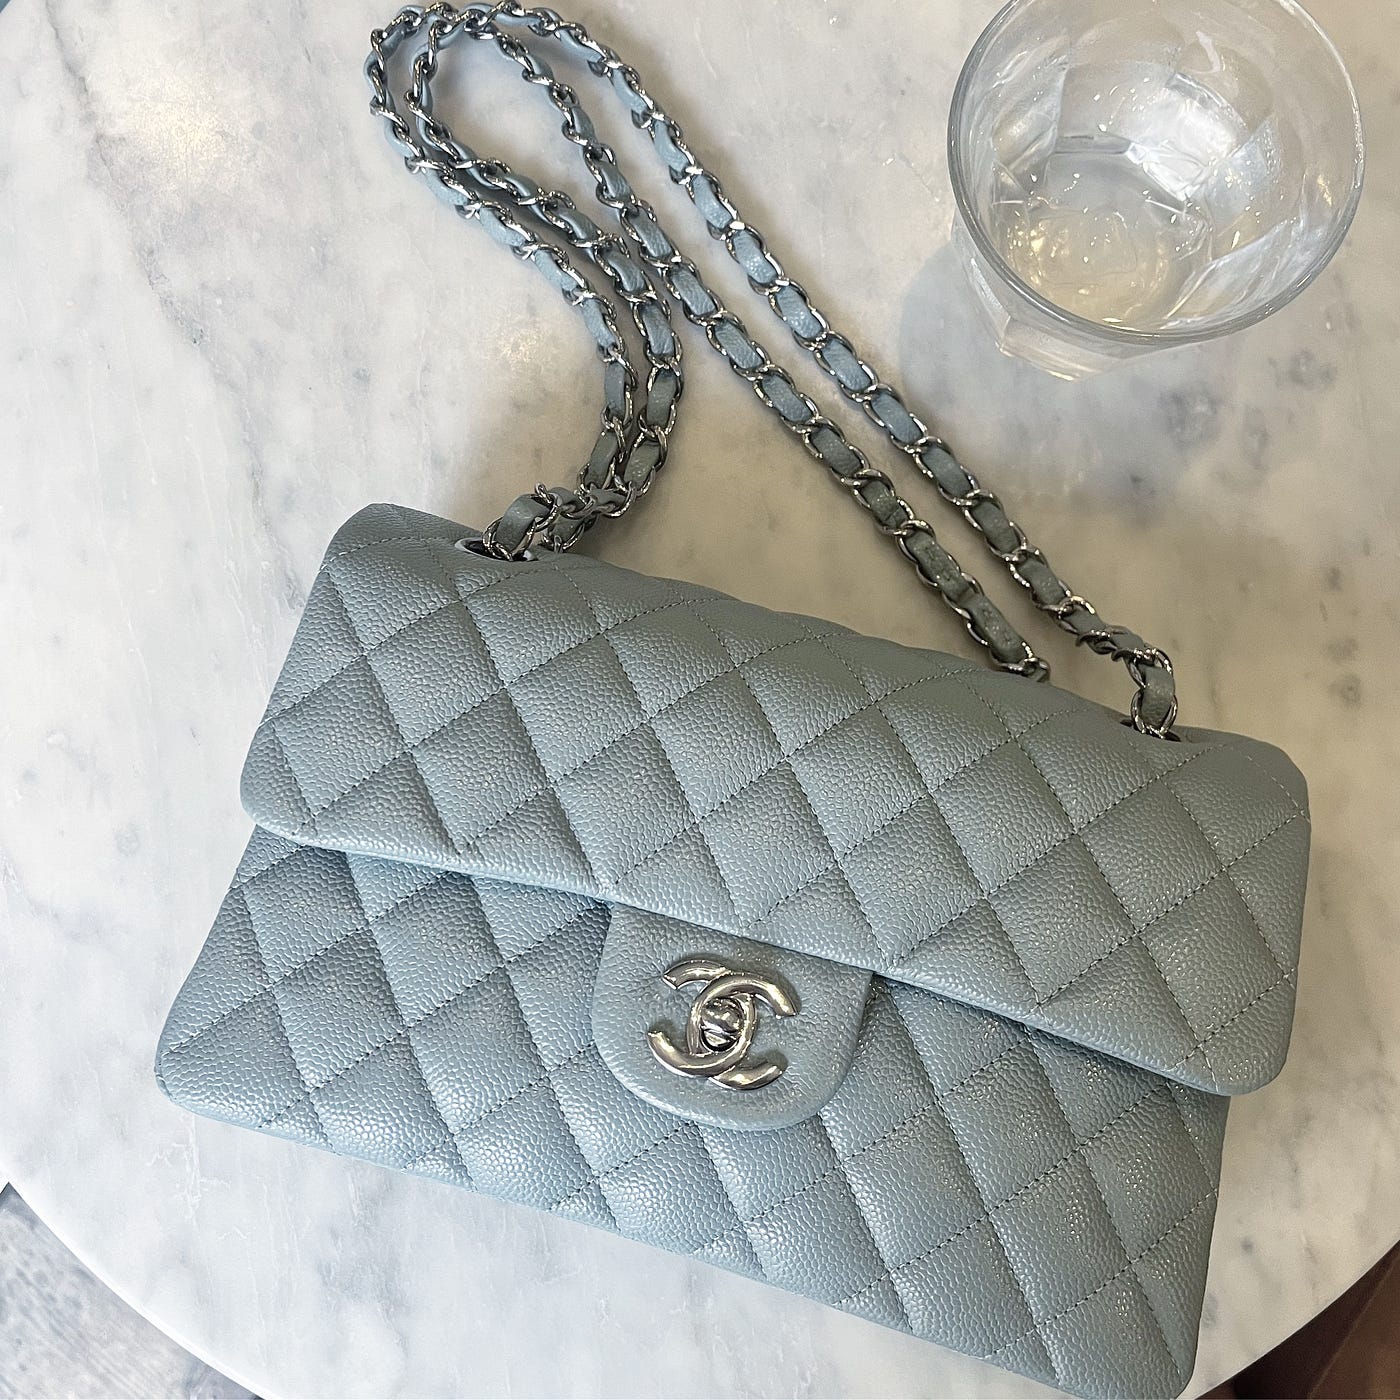 Designer Bags: Entry Level Bags & Their Cons (Chanel Classic Flap